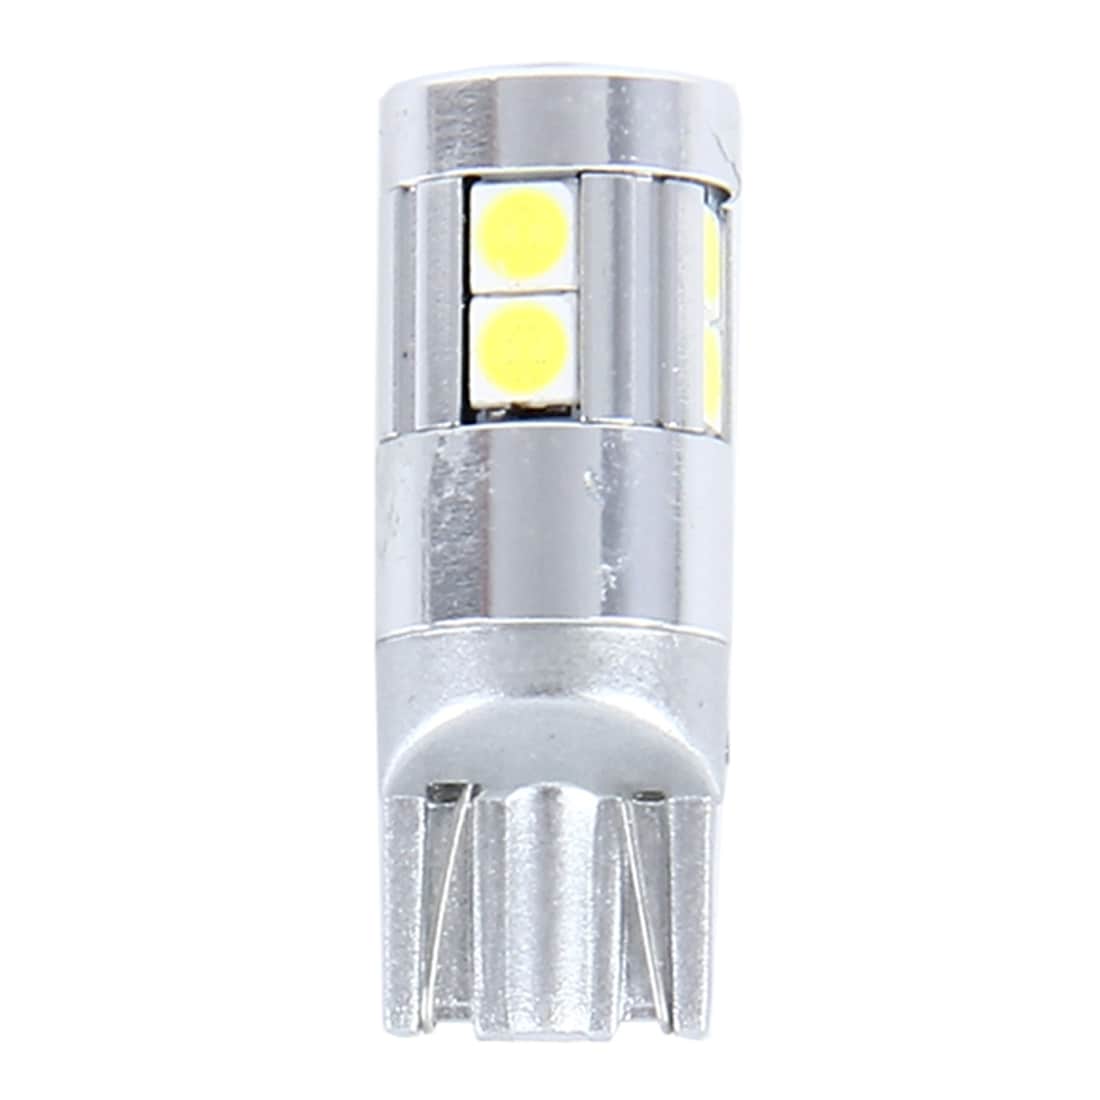 LED Lamp T10 5W Canbus